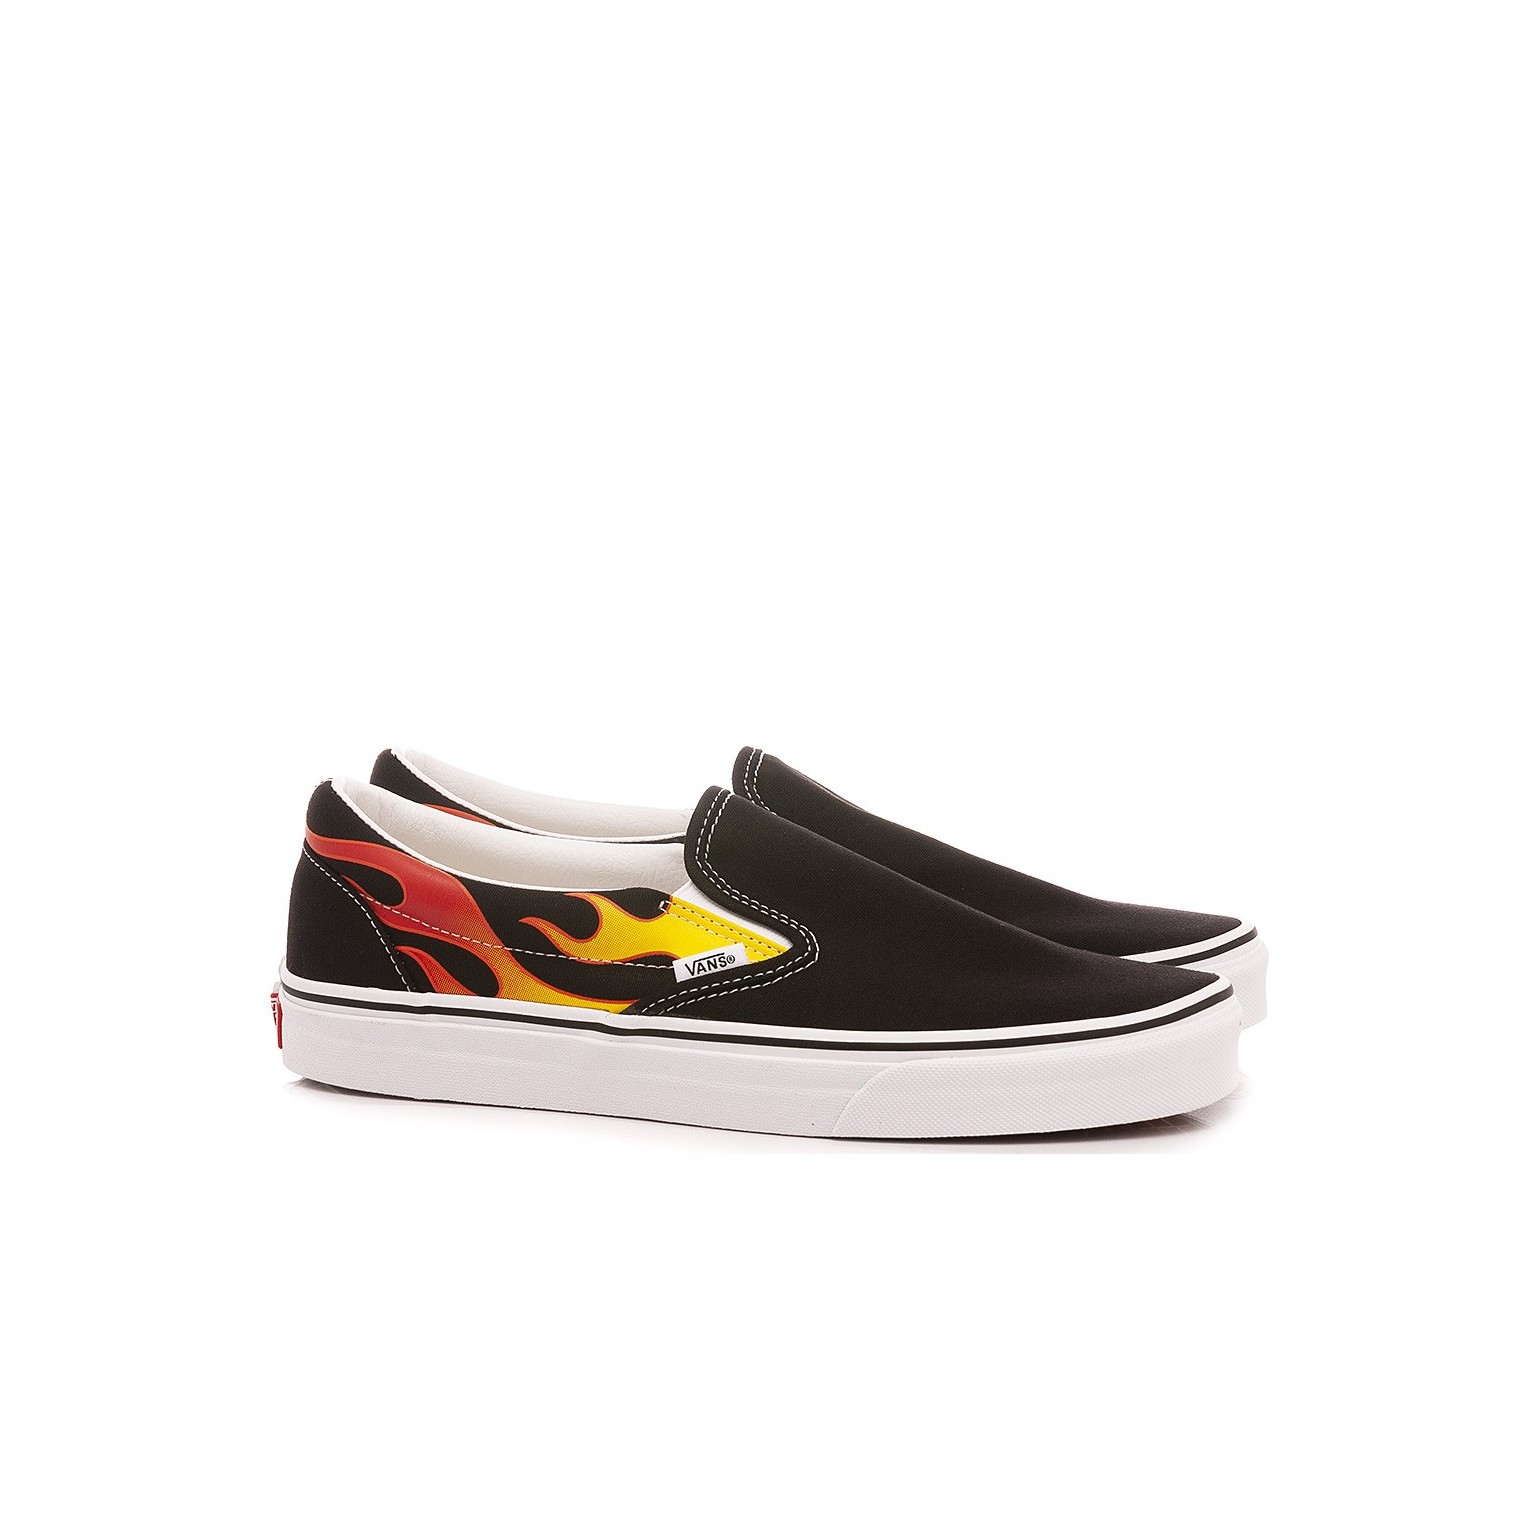 Vans Sneakers Donna Classic Slipon Flame VN0A38F7PHN1